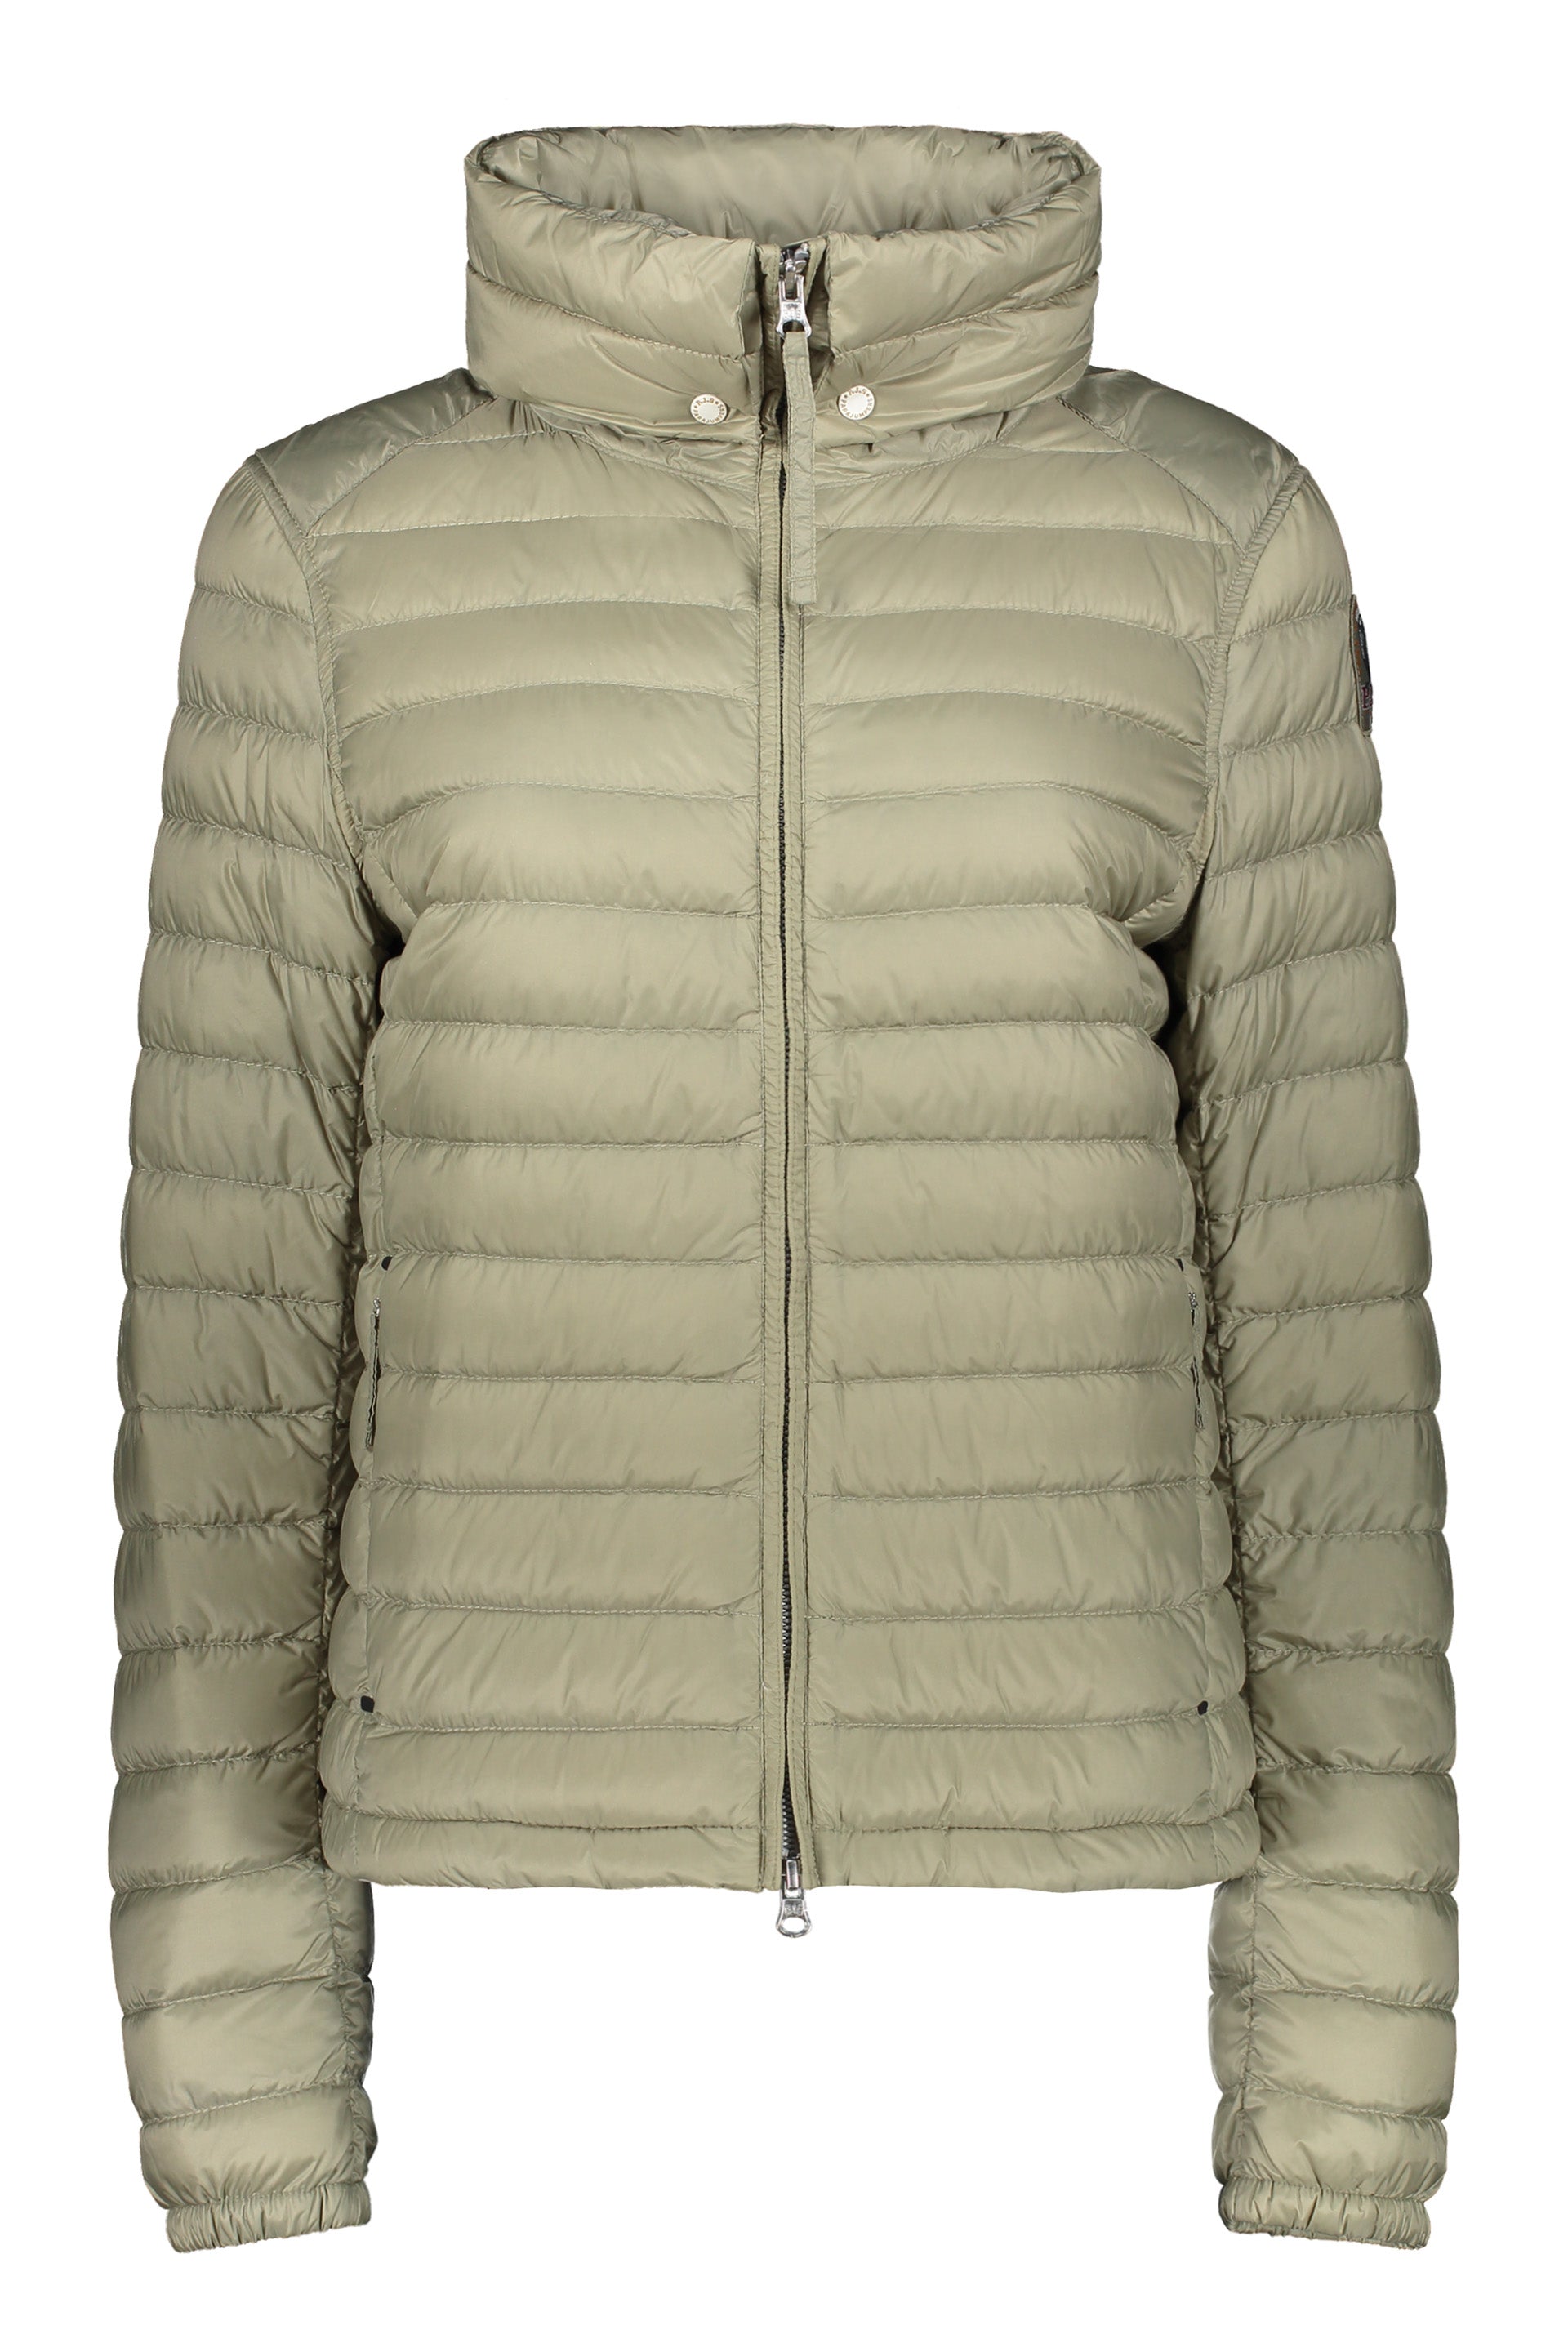 Parajumpers-OUTLET-SALE-Ayame-short-down-jacket-Jacken-Mantel-S-ARCHIVE-COLLECTION.jpg